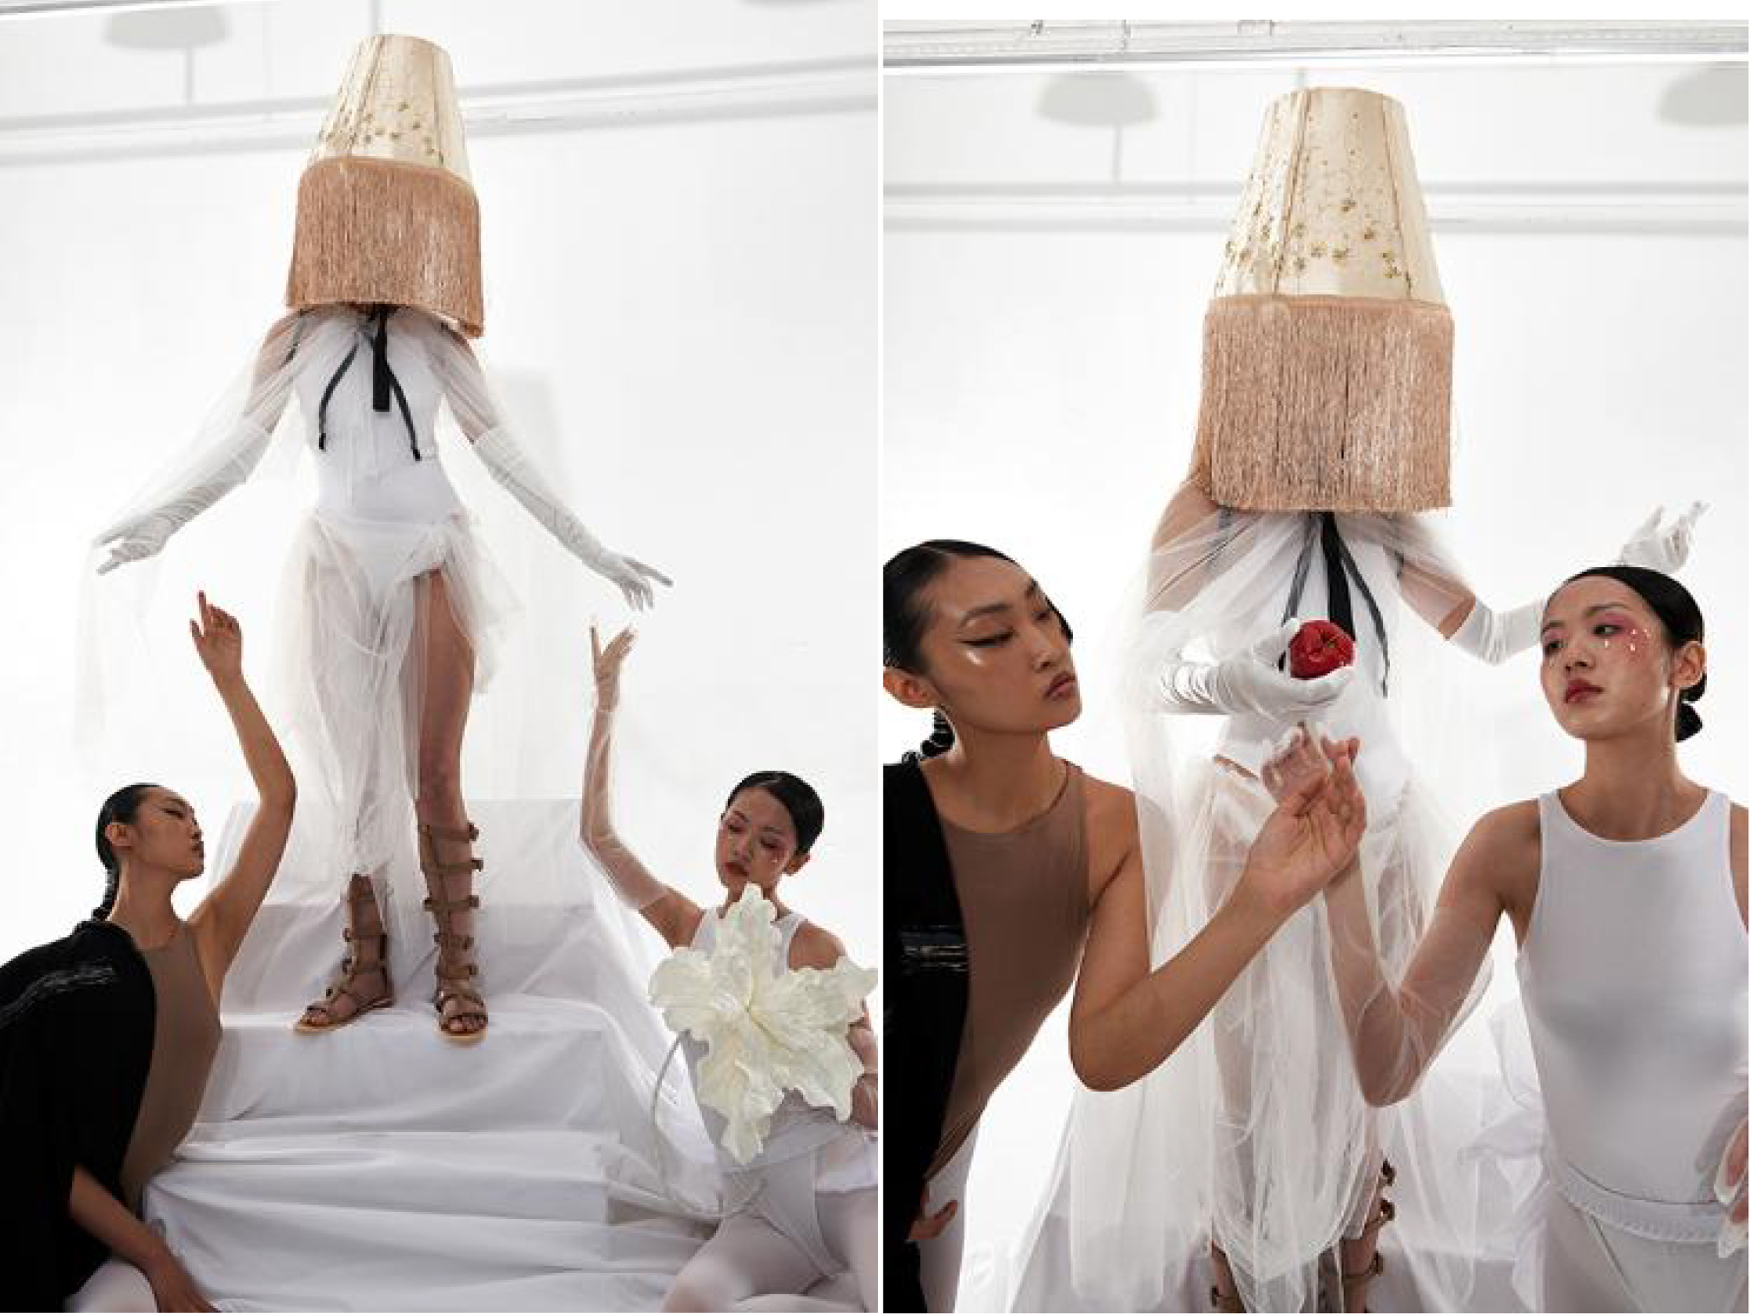 Two photos, side by side, of two women looking up at and interacting with a third woman in a couture outfit wearing an ornate lampshade on her head